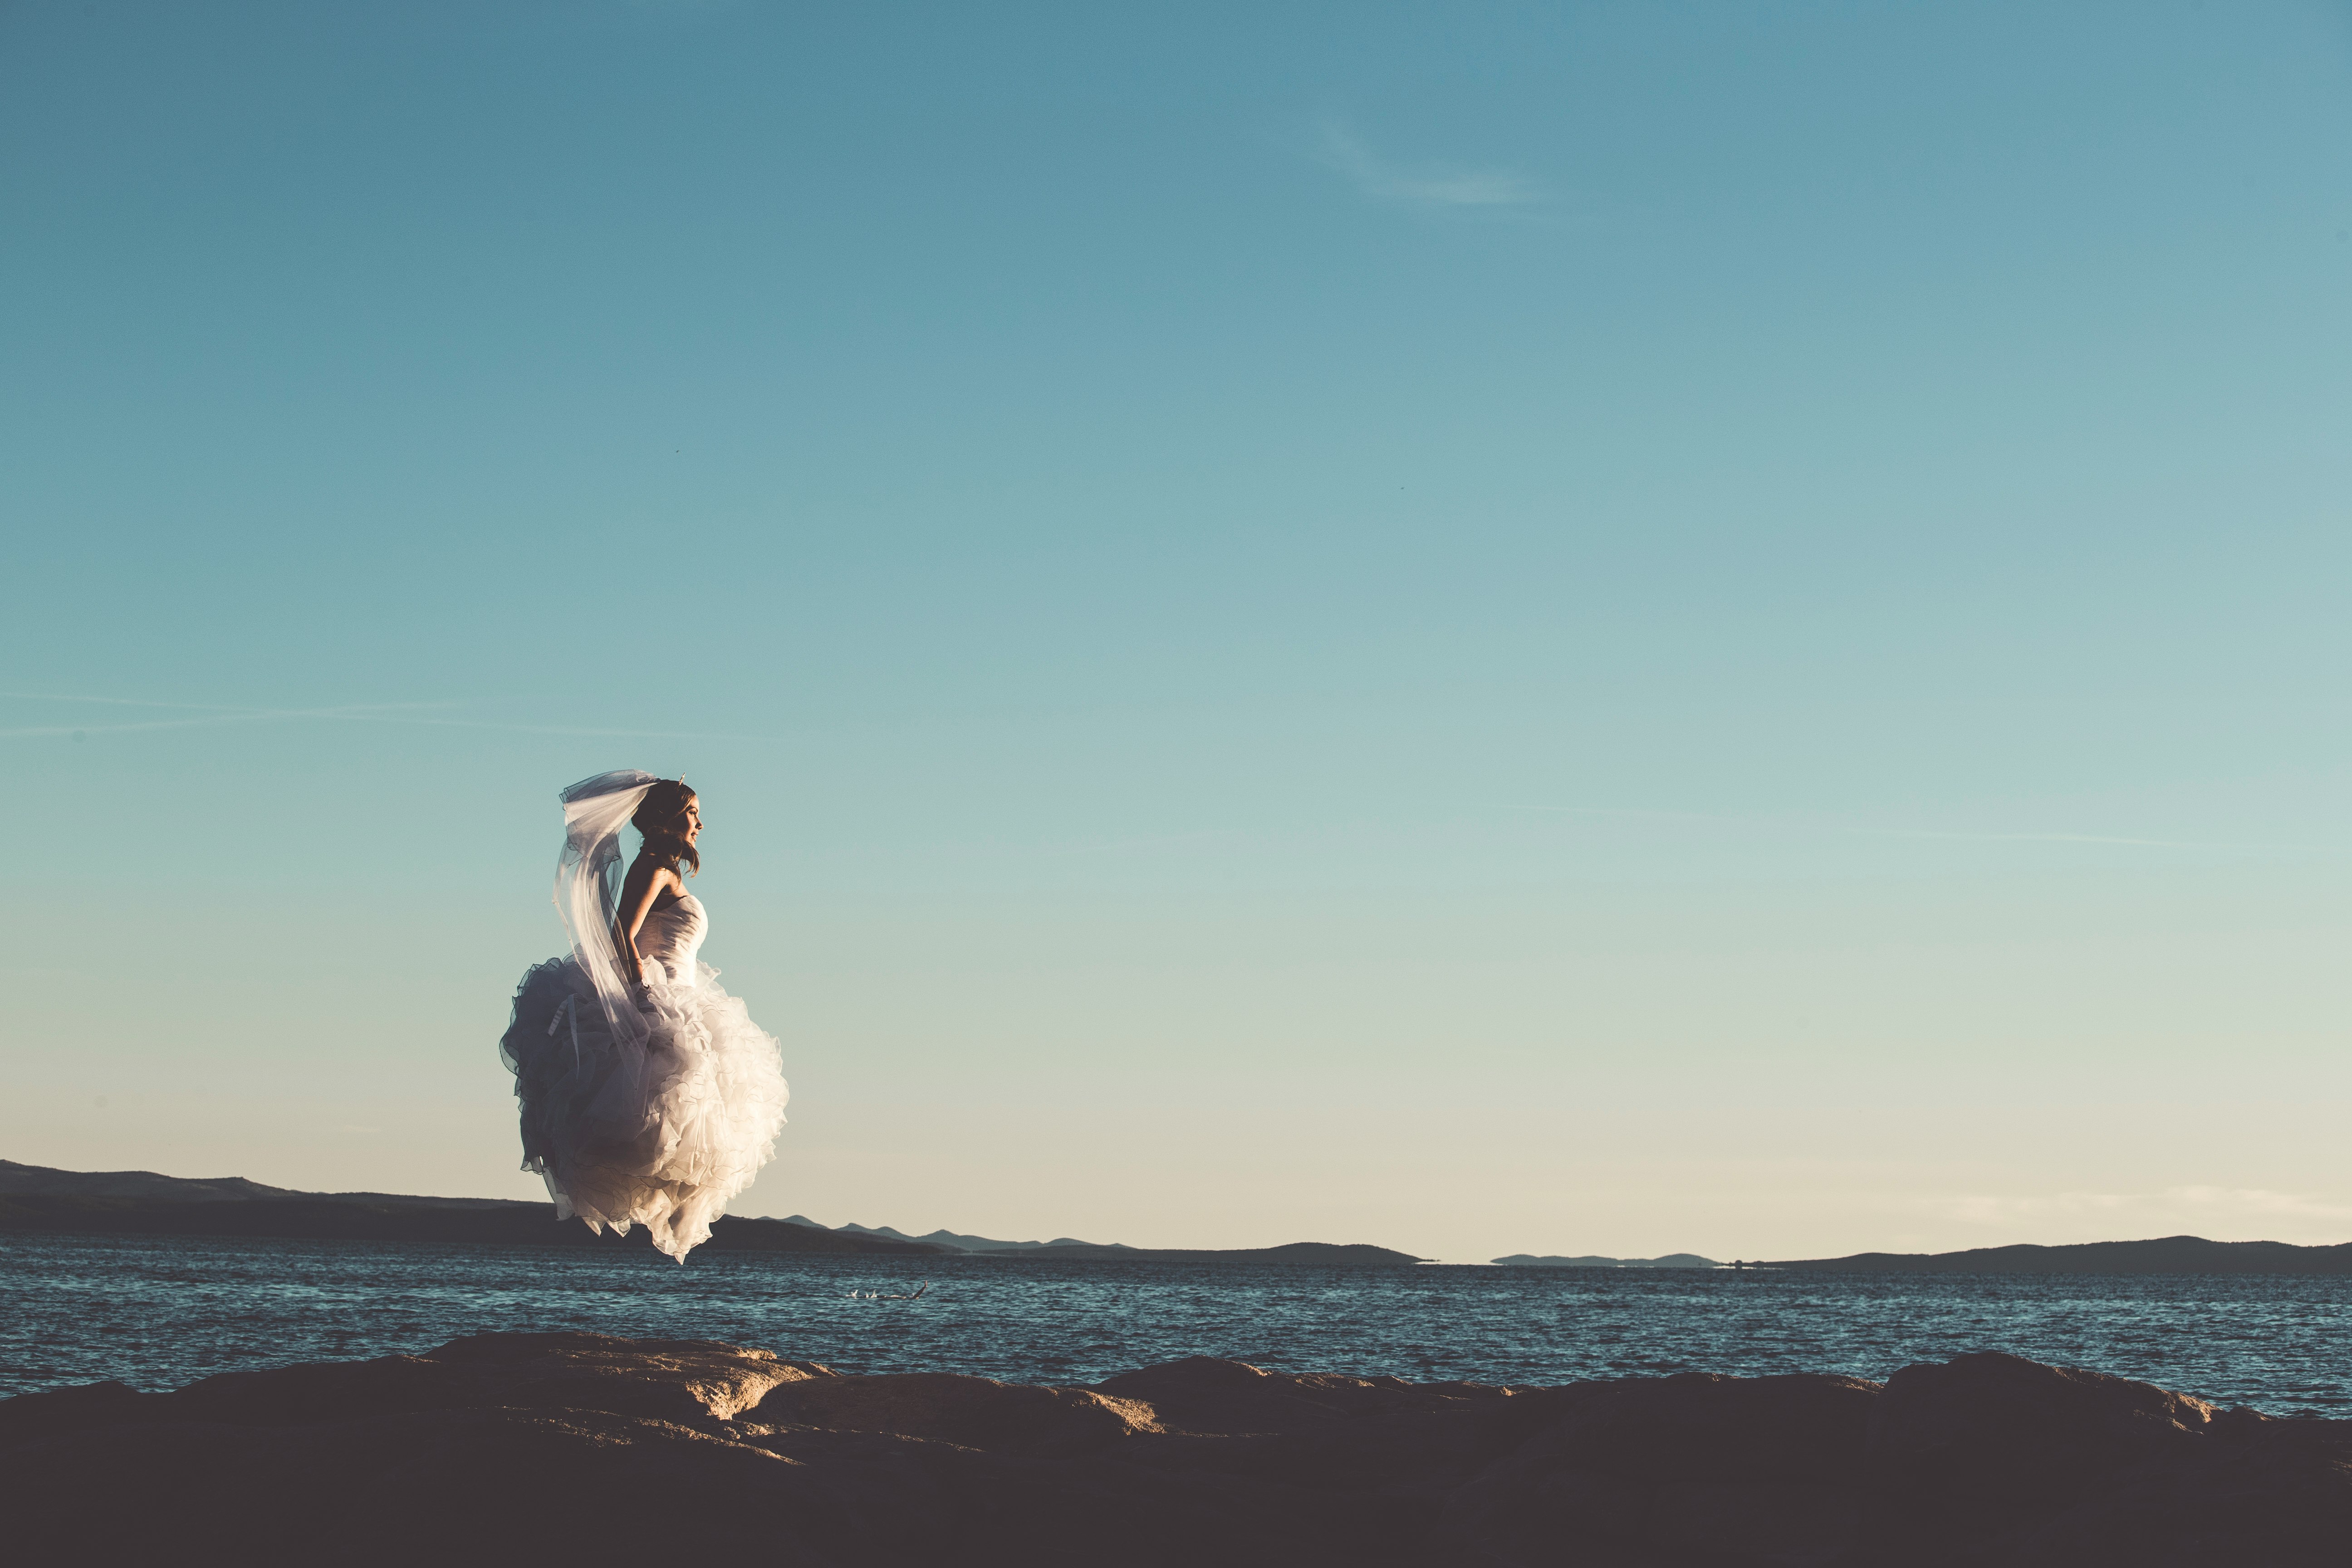 woman in white bridal gown jump in mid air next to body of water